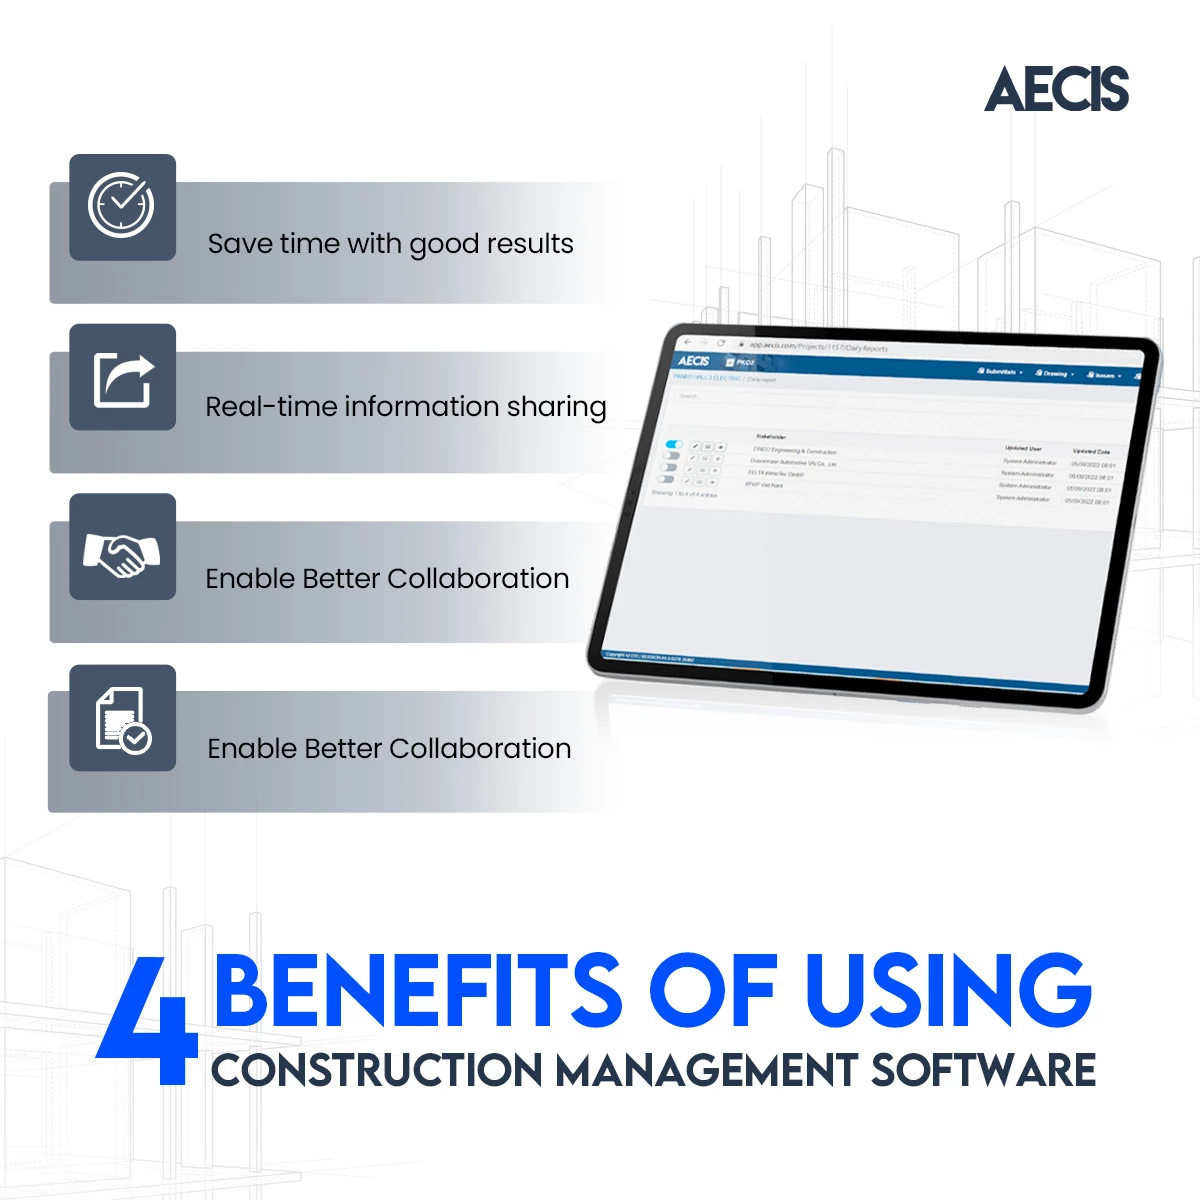 4 benefits of using construction management software